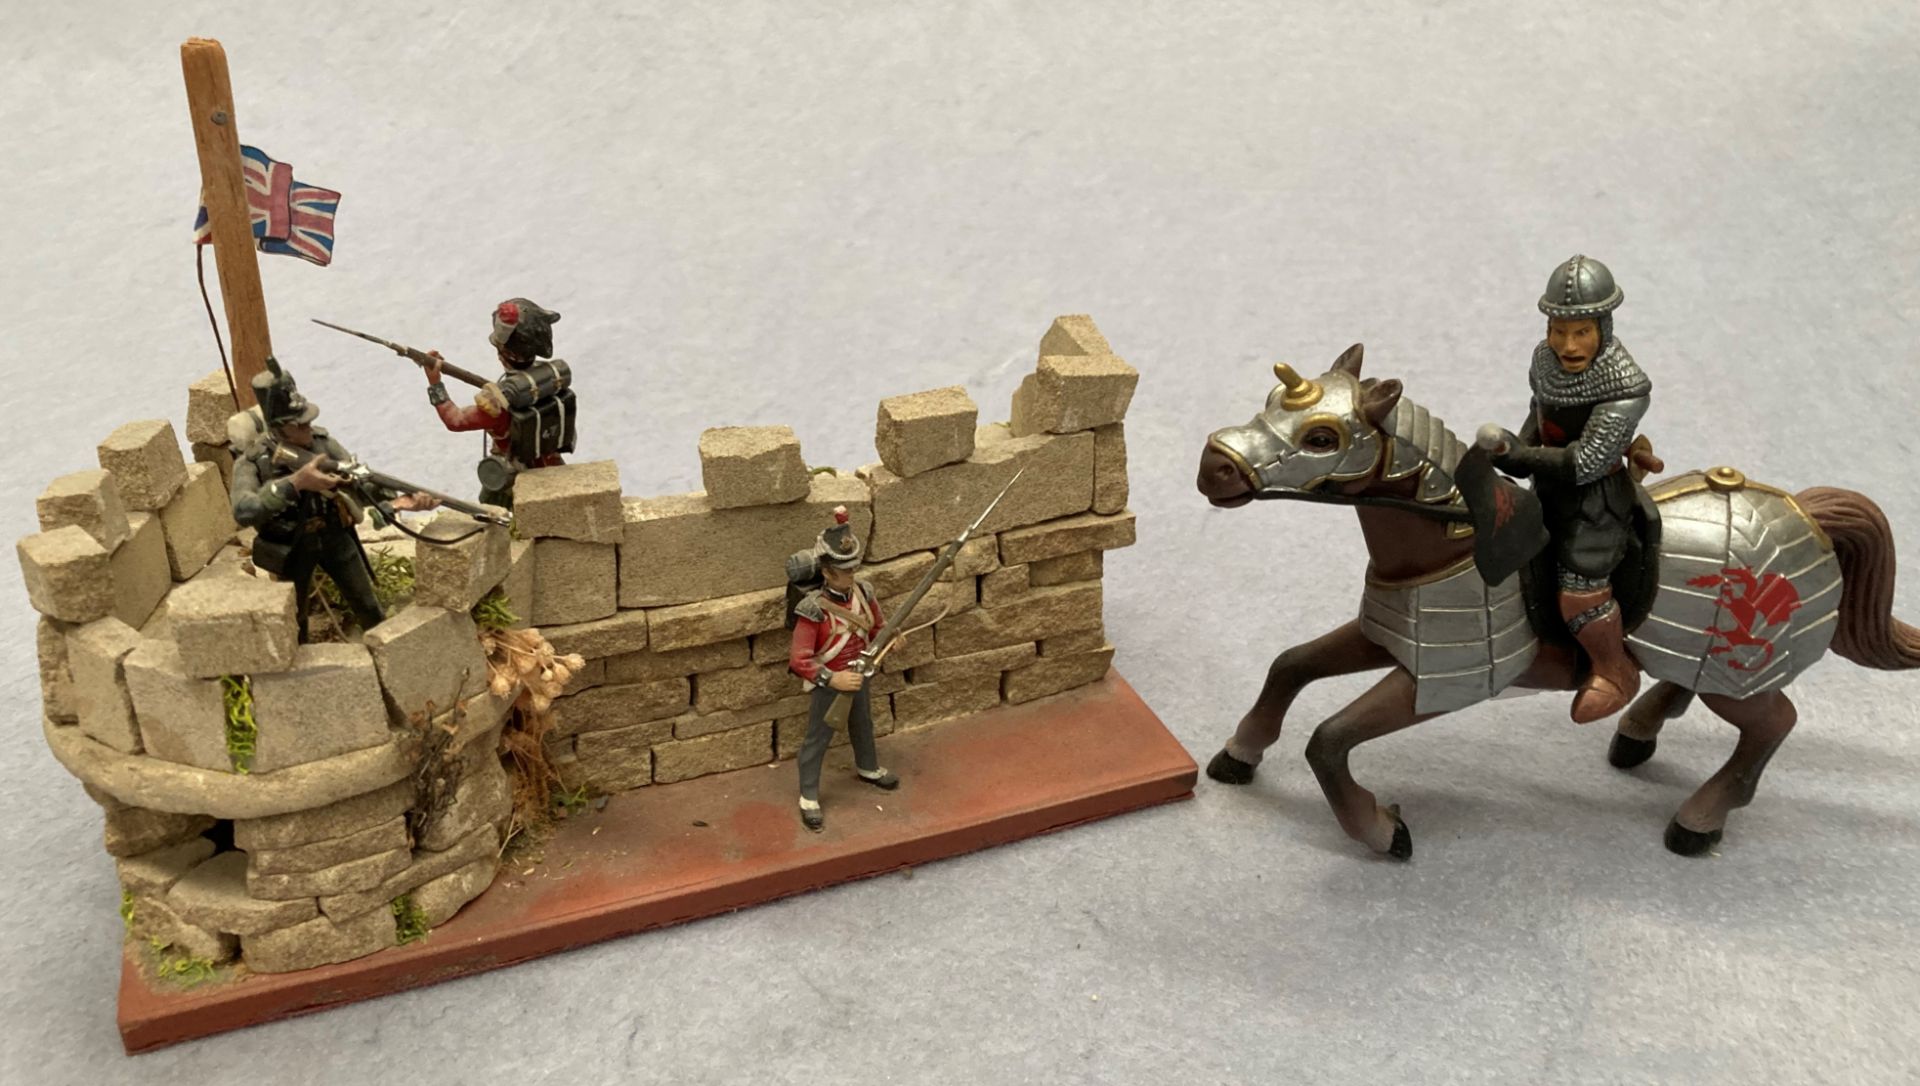 A scale model of a Medieval Knight/horseman in full armour and a scale model of a Napoleonic war